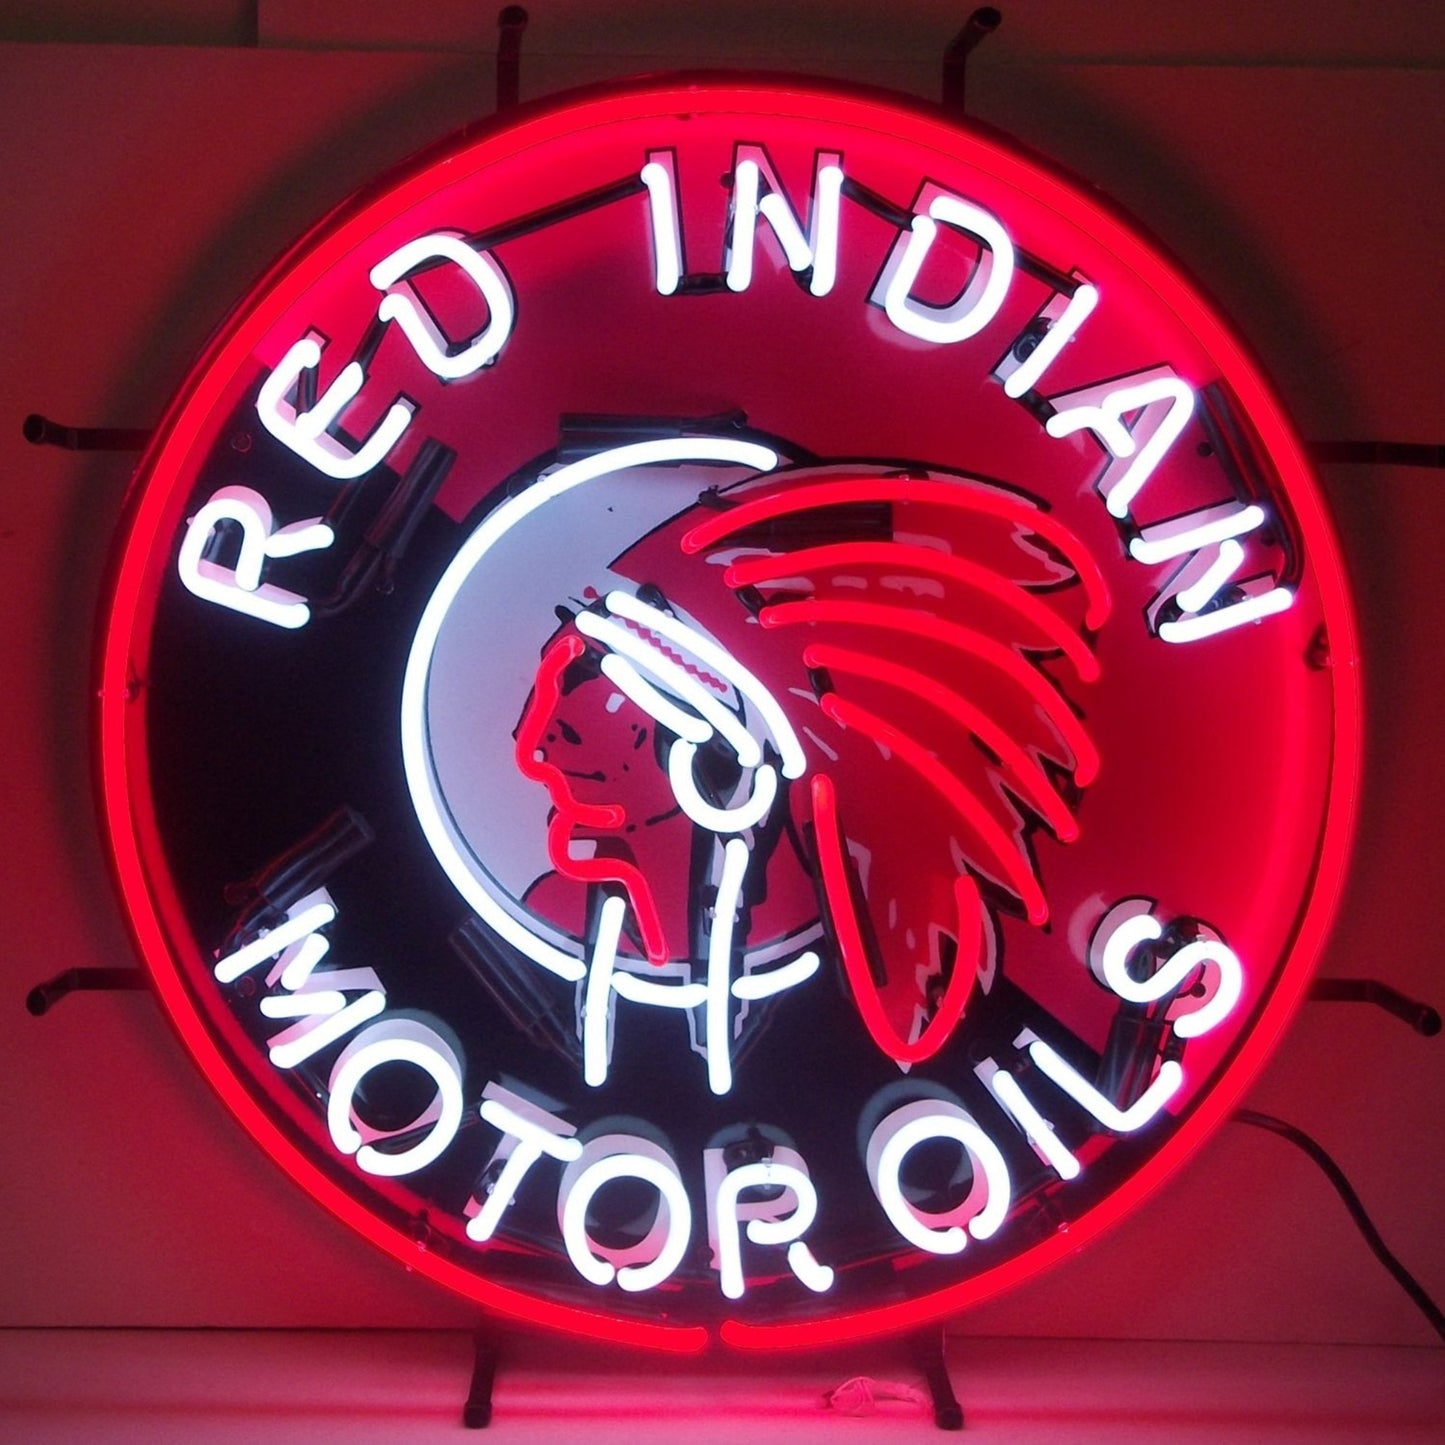 "Red Indian Motor Oils" in white neon surrounding neon depiction of the brand's logo. Neon set on top of red and black background.